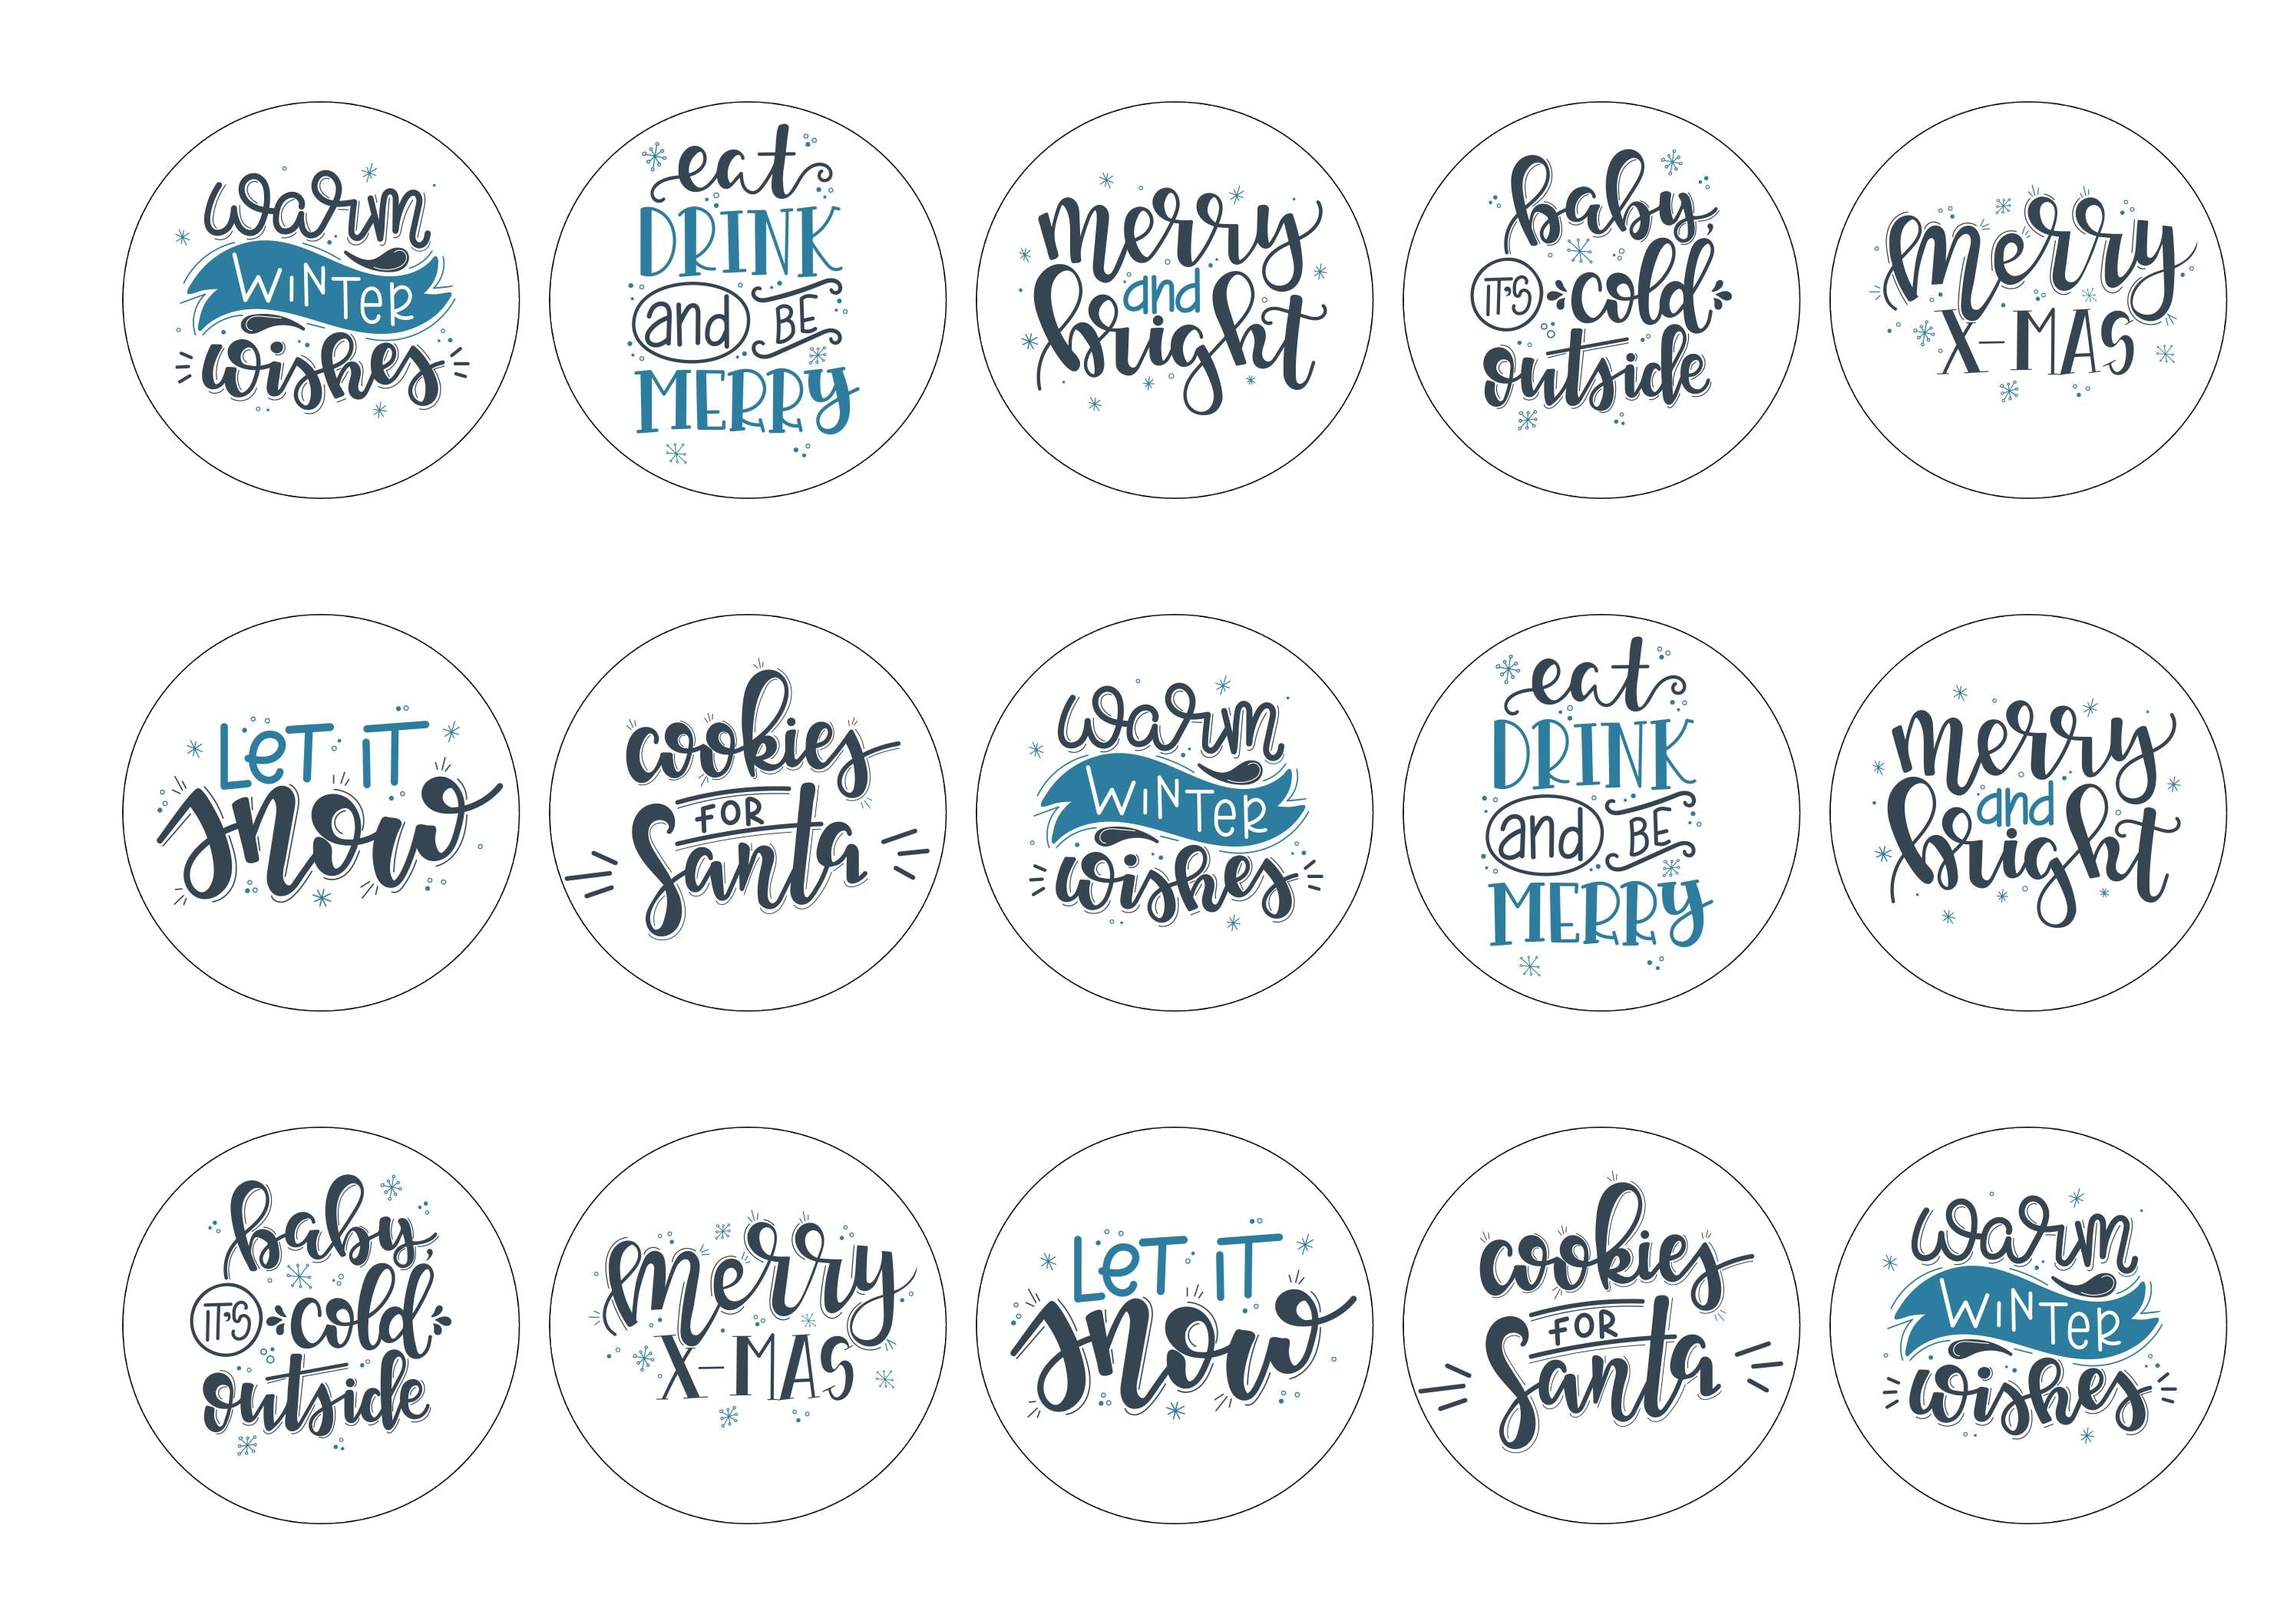 Winter wishes edible toppers with Christmas slogans or sayings